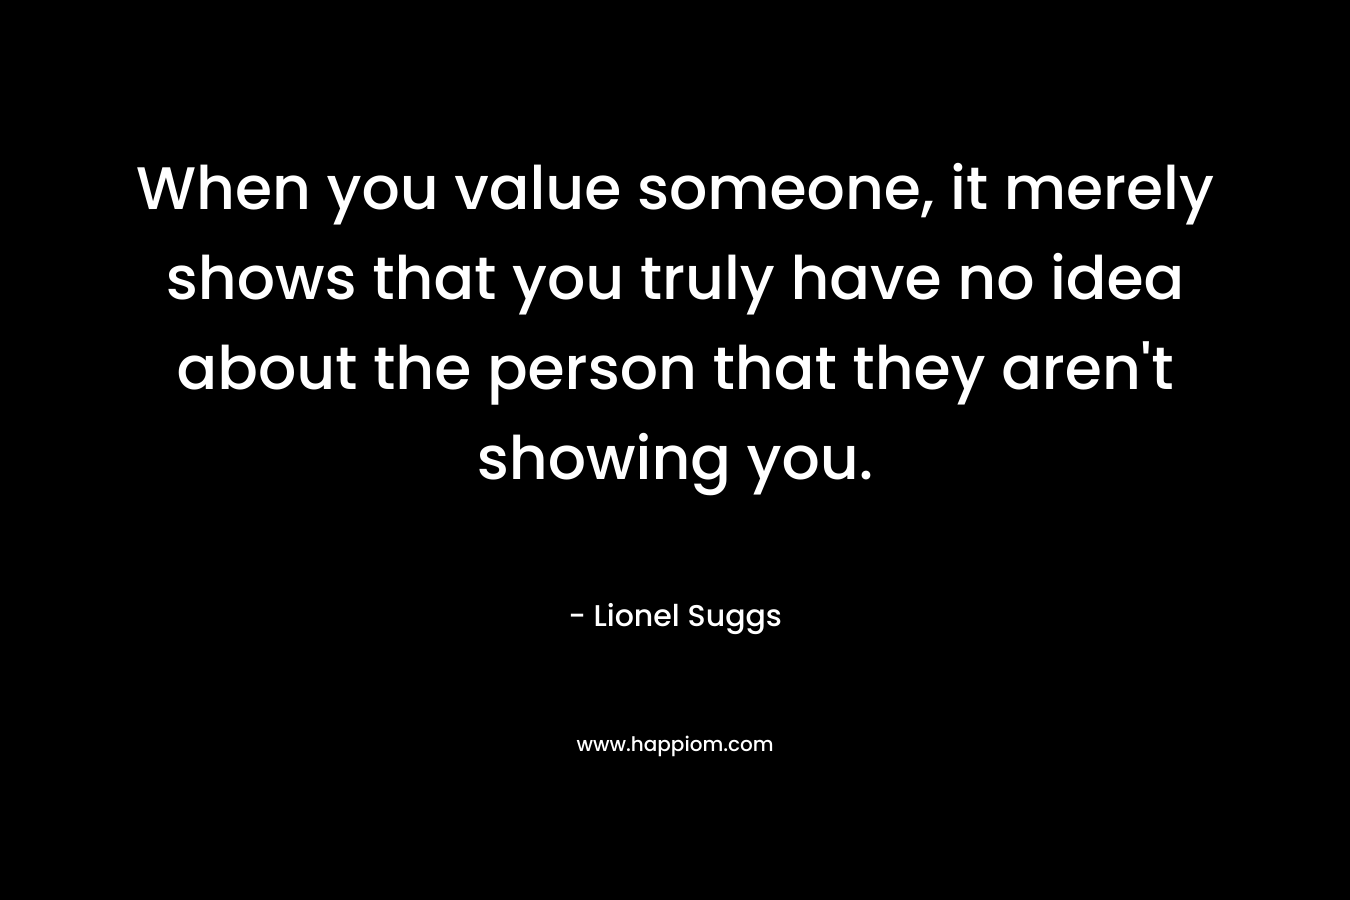 When you value someone, it merely shows that you truly have no idea about the person that they aren't showing you.